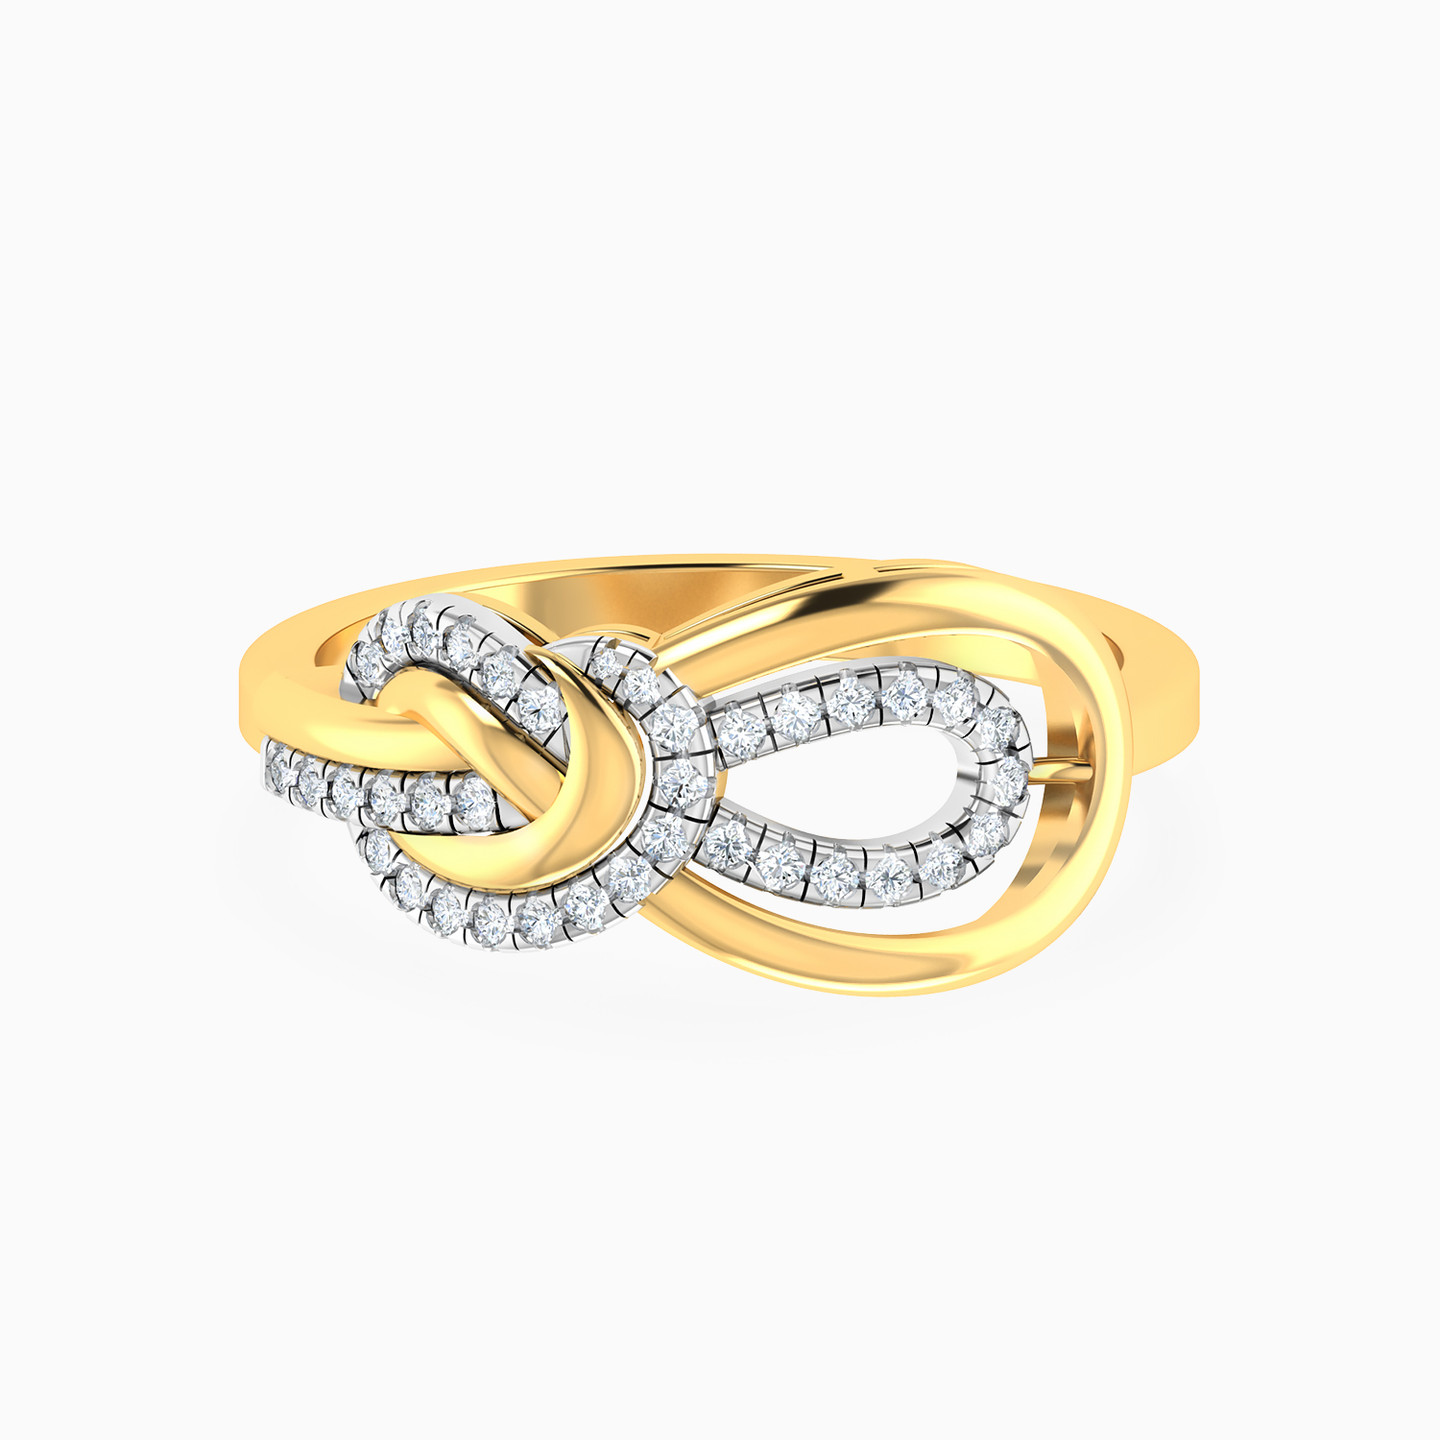 Knot Shaped Diamond Statement Ring in 18K Gold